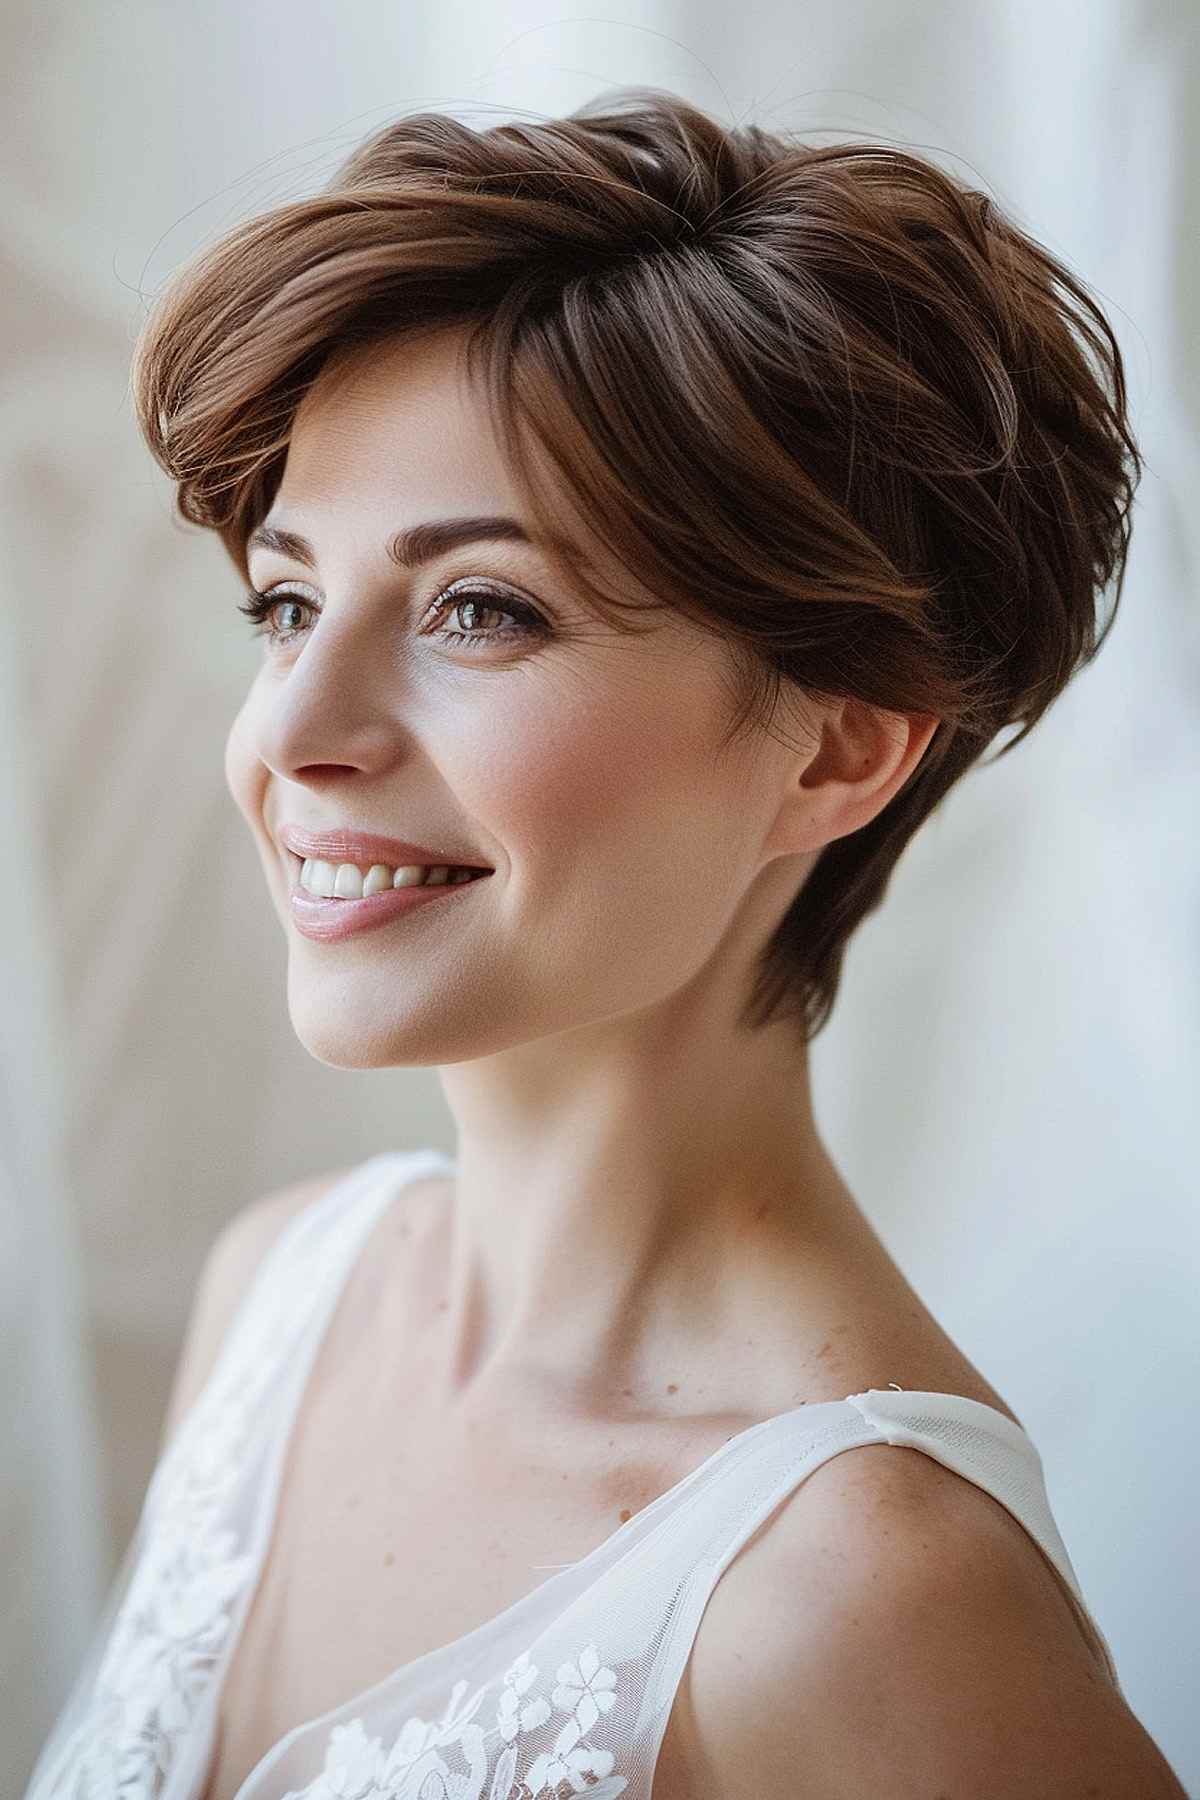 Short pixie cut with feathered layers framing the face, adding volume and texture.